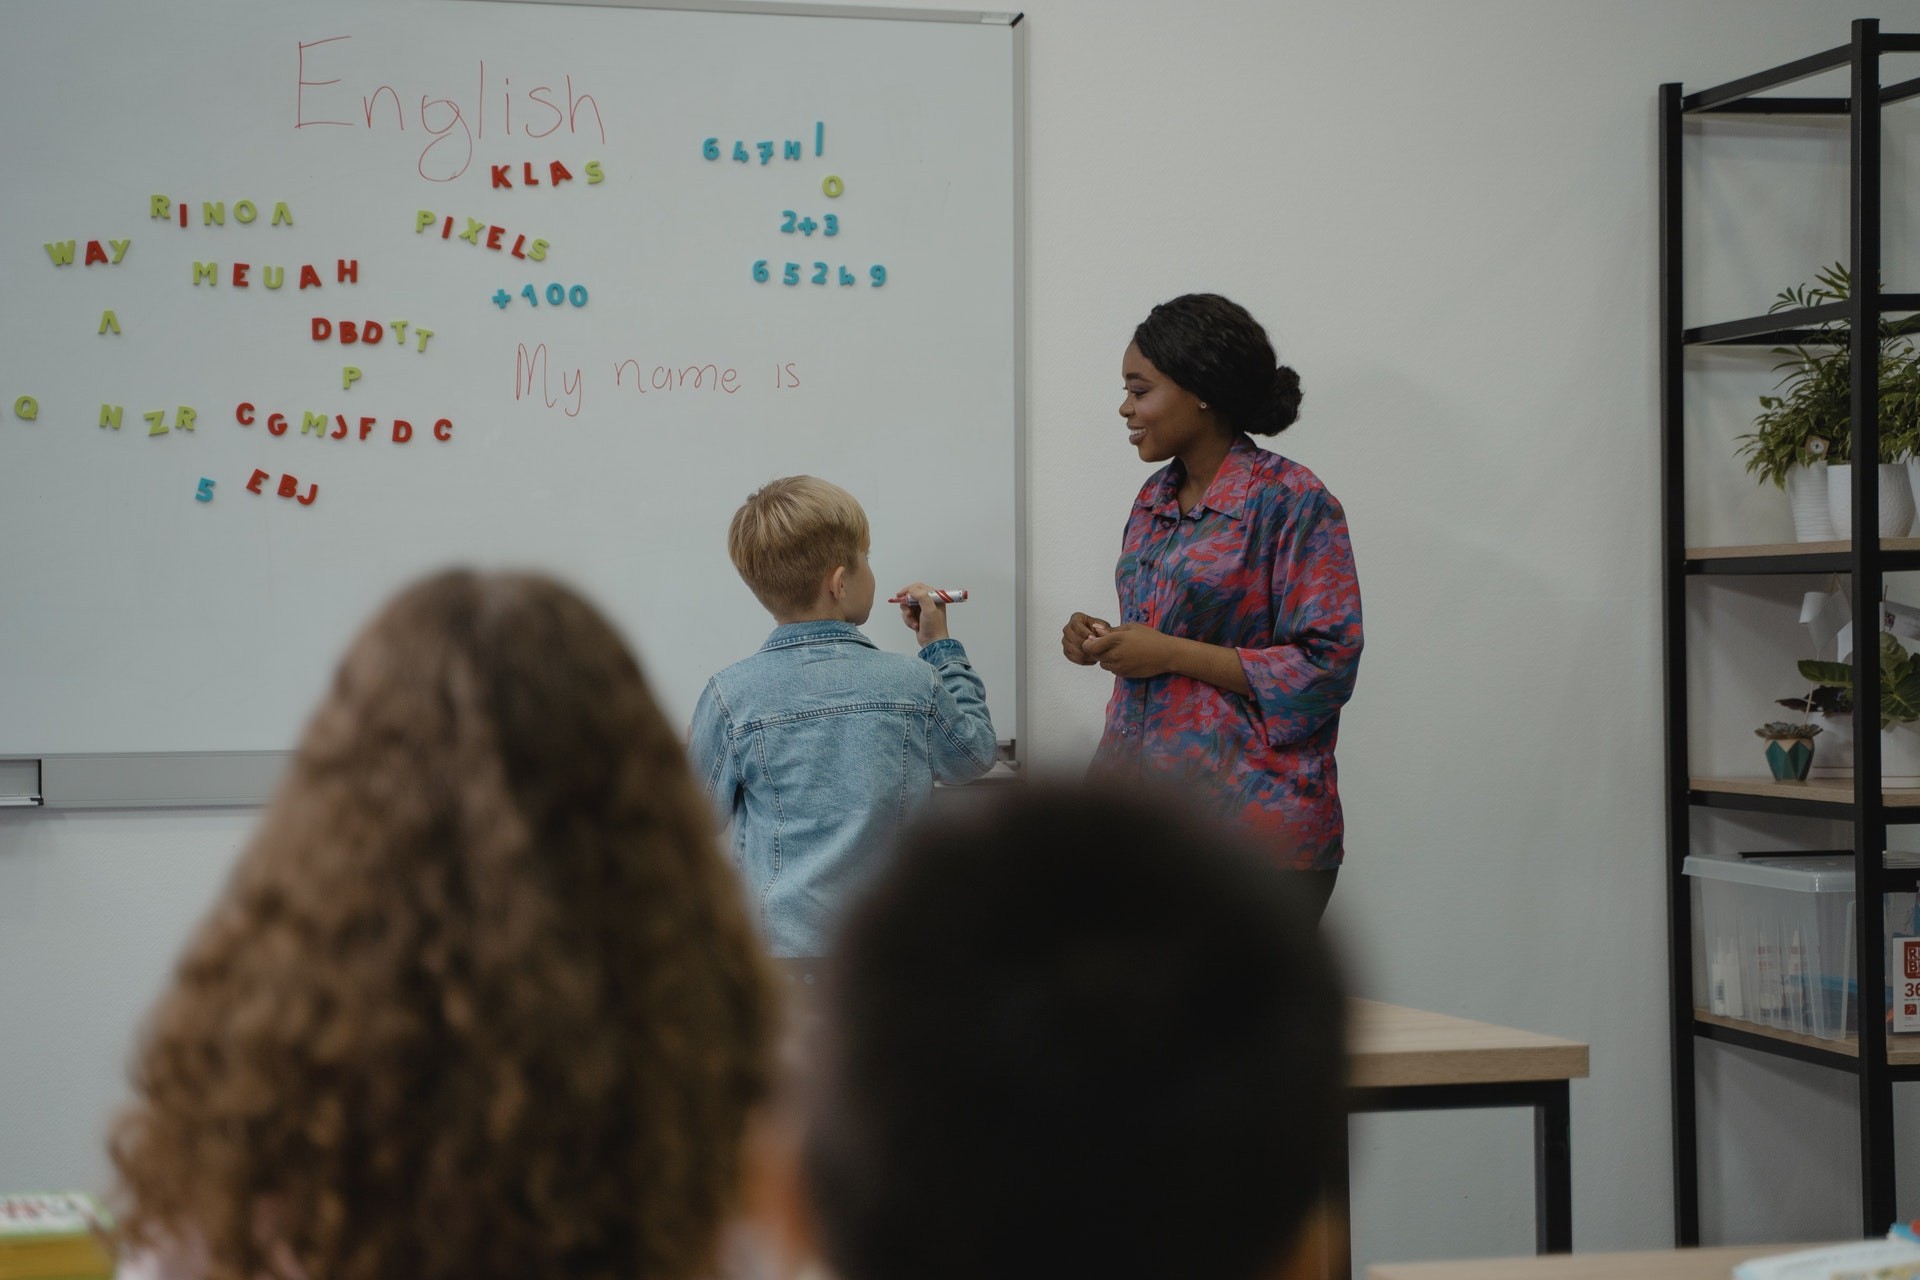 A teacher uses new teaching methods with a student at the whiteboard in english class.